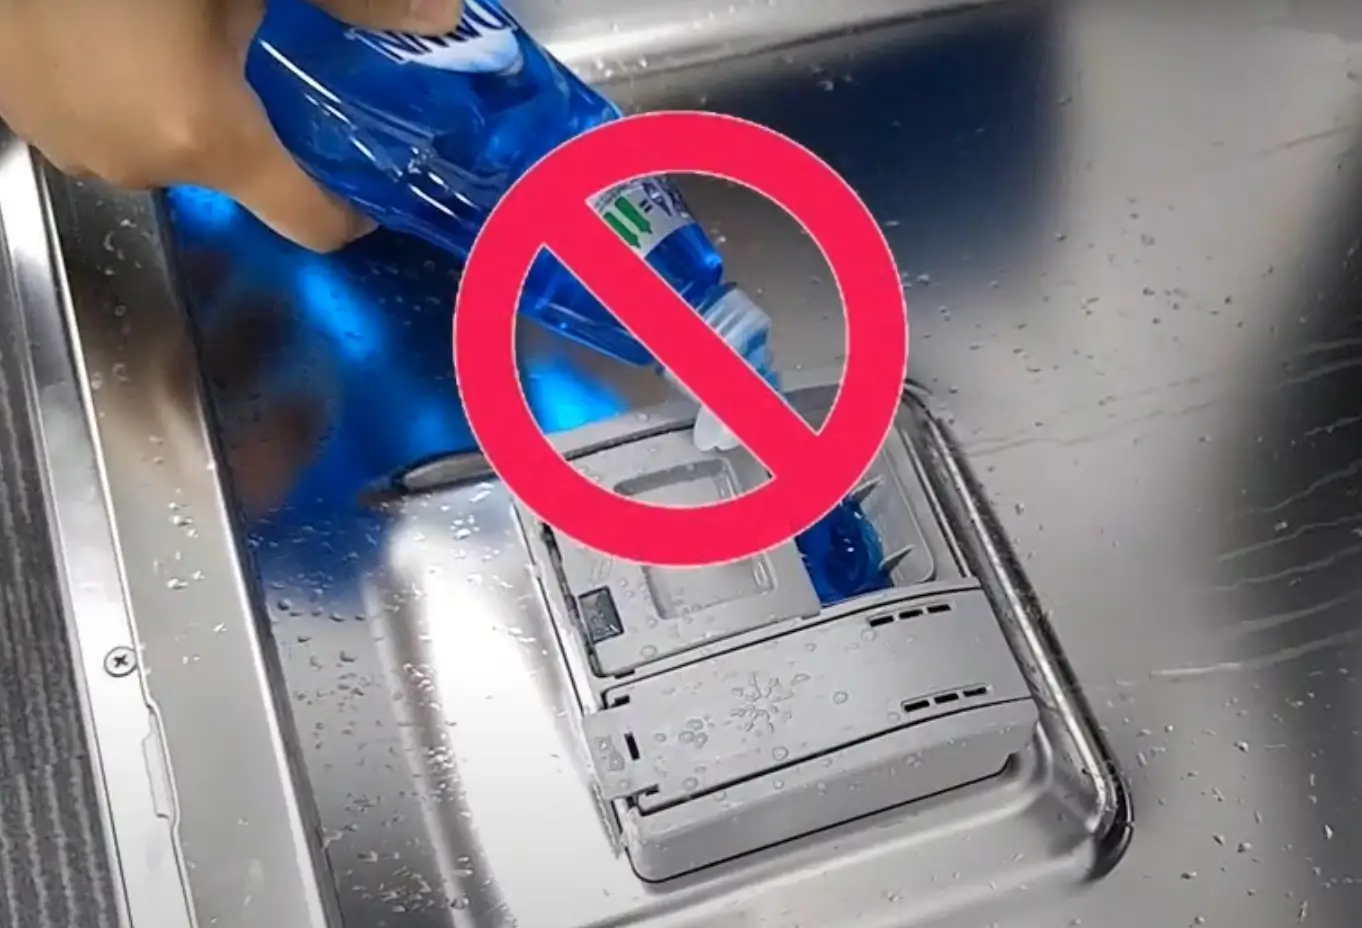 Image of puting wrong detergent in the dishwasher